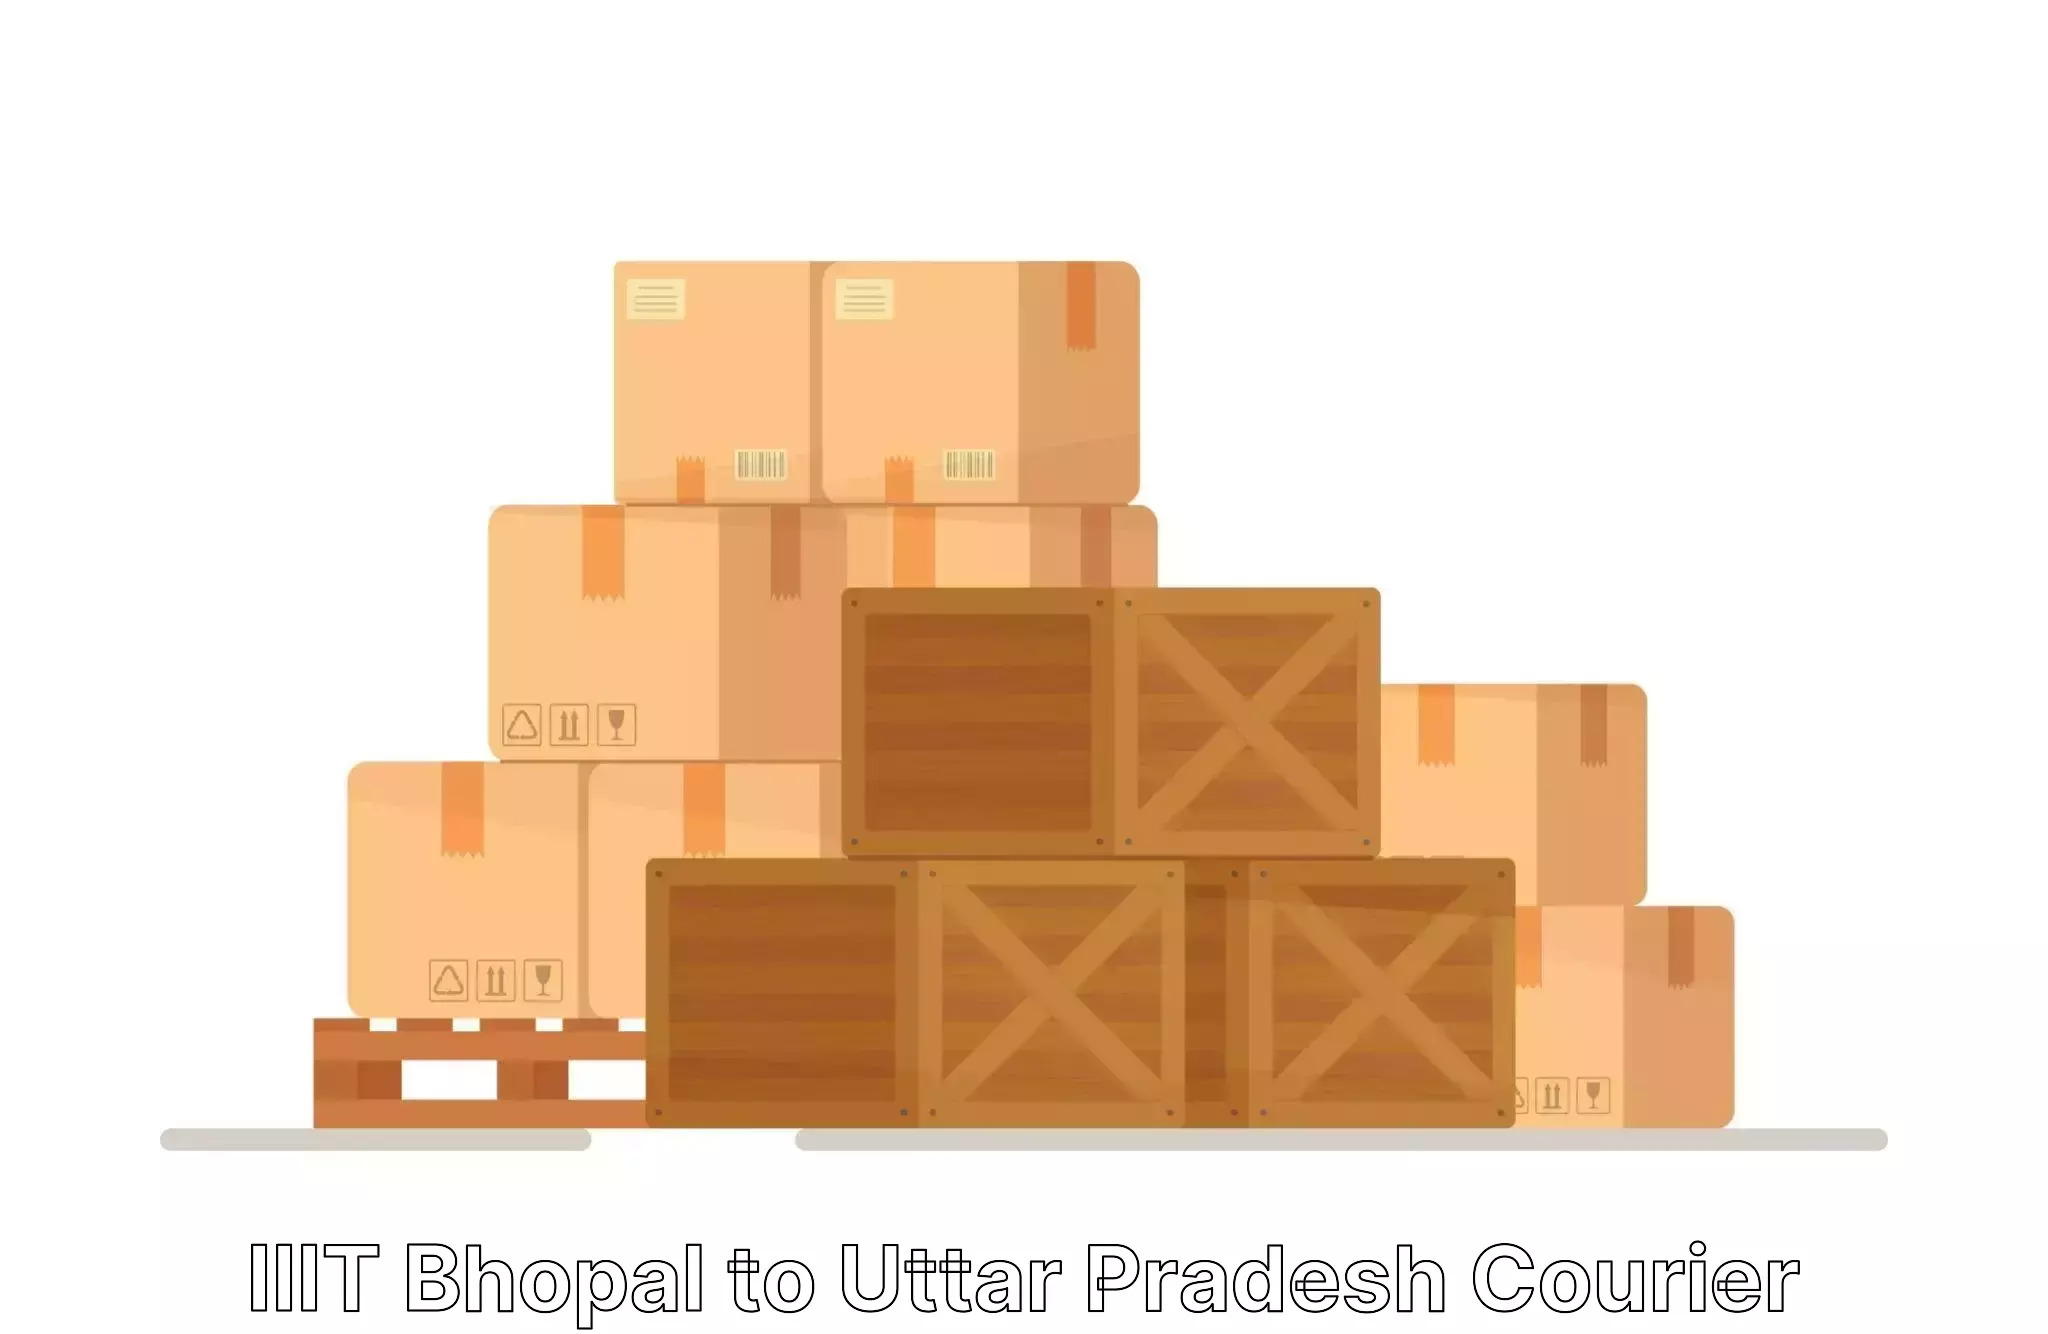 Personalized relocation solutions IIIT Bhopal to IIT Kanpur